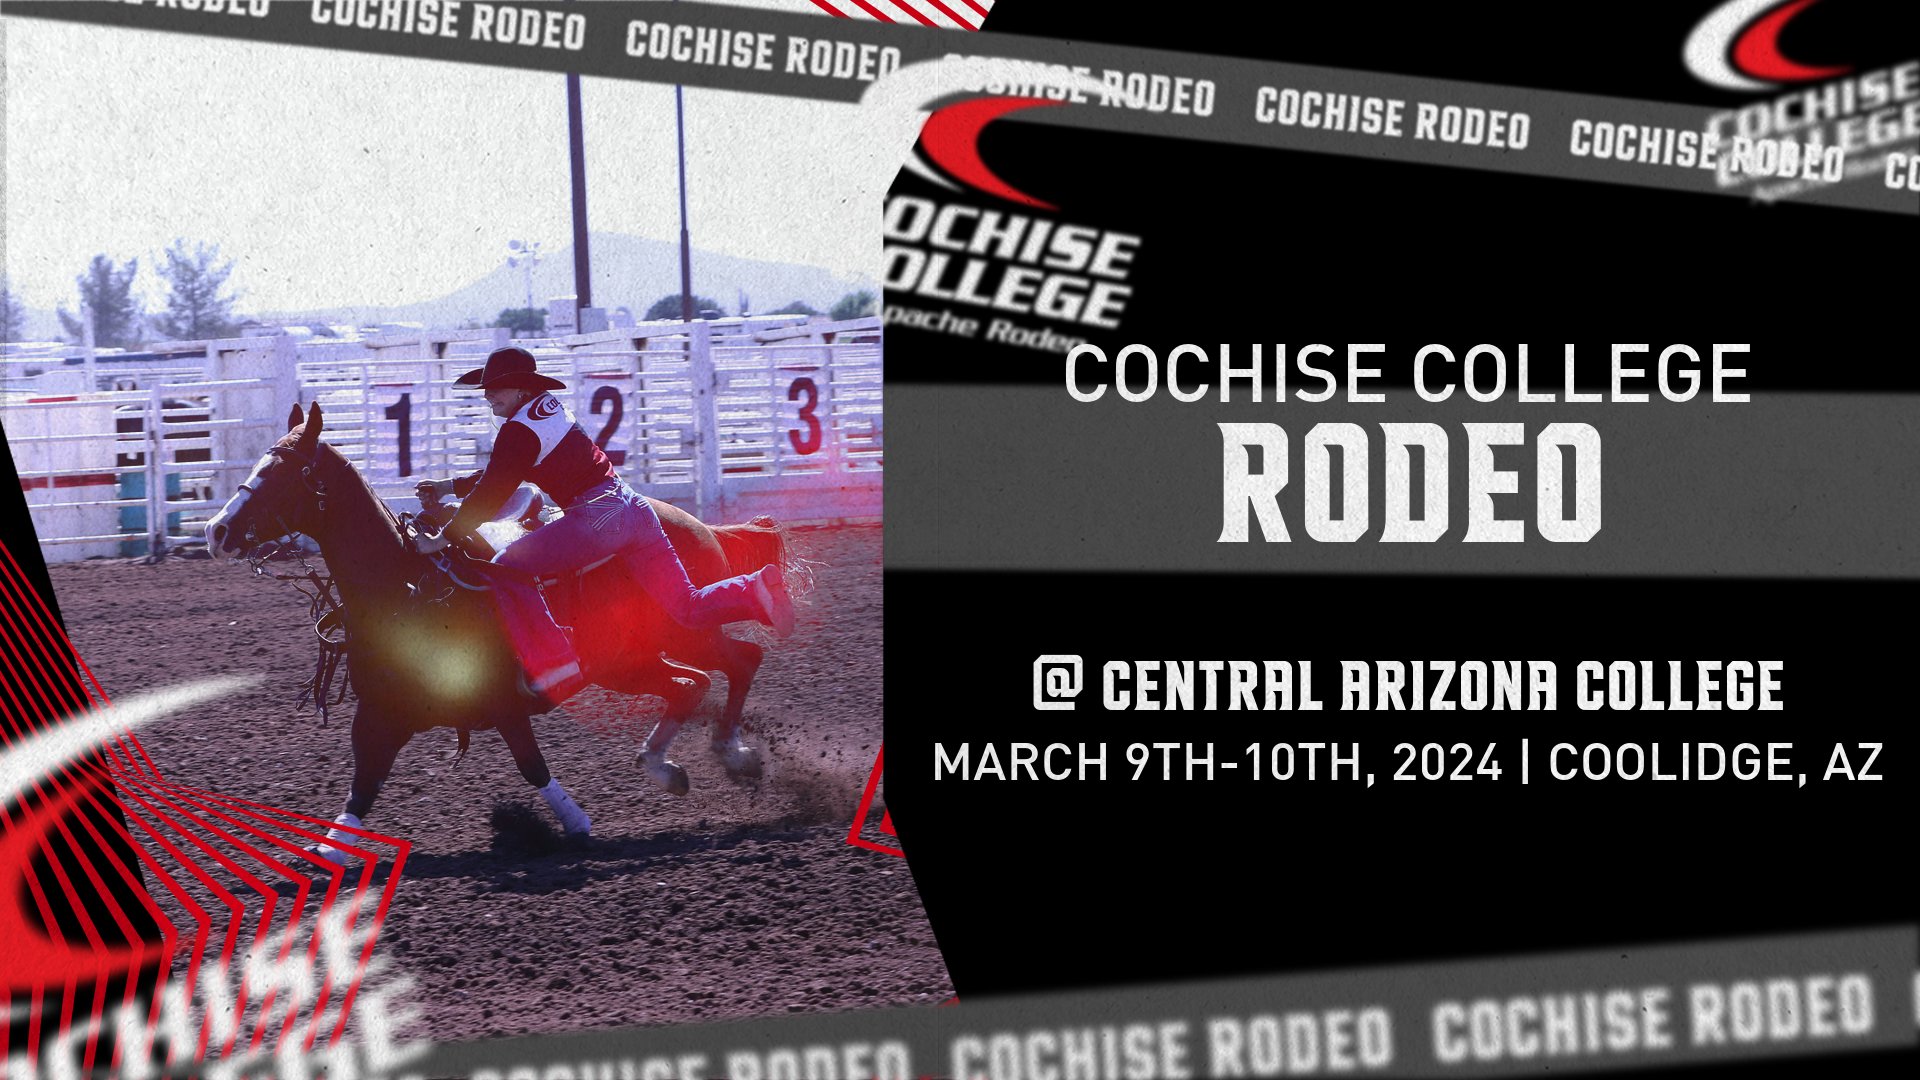 Cochise Rodeo at CAC